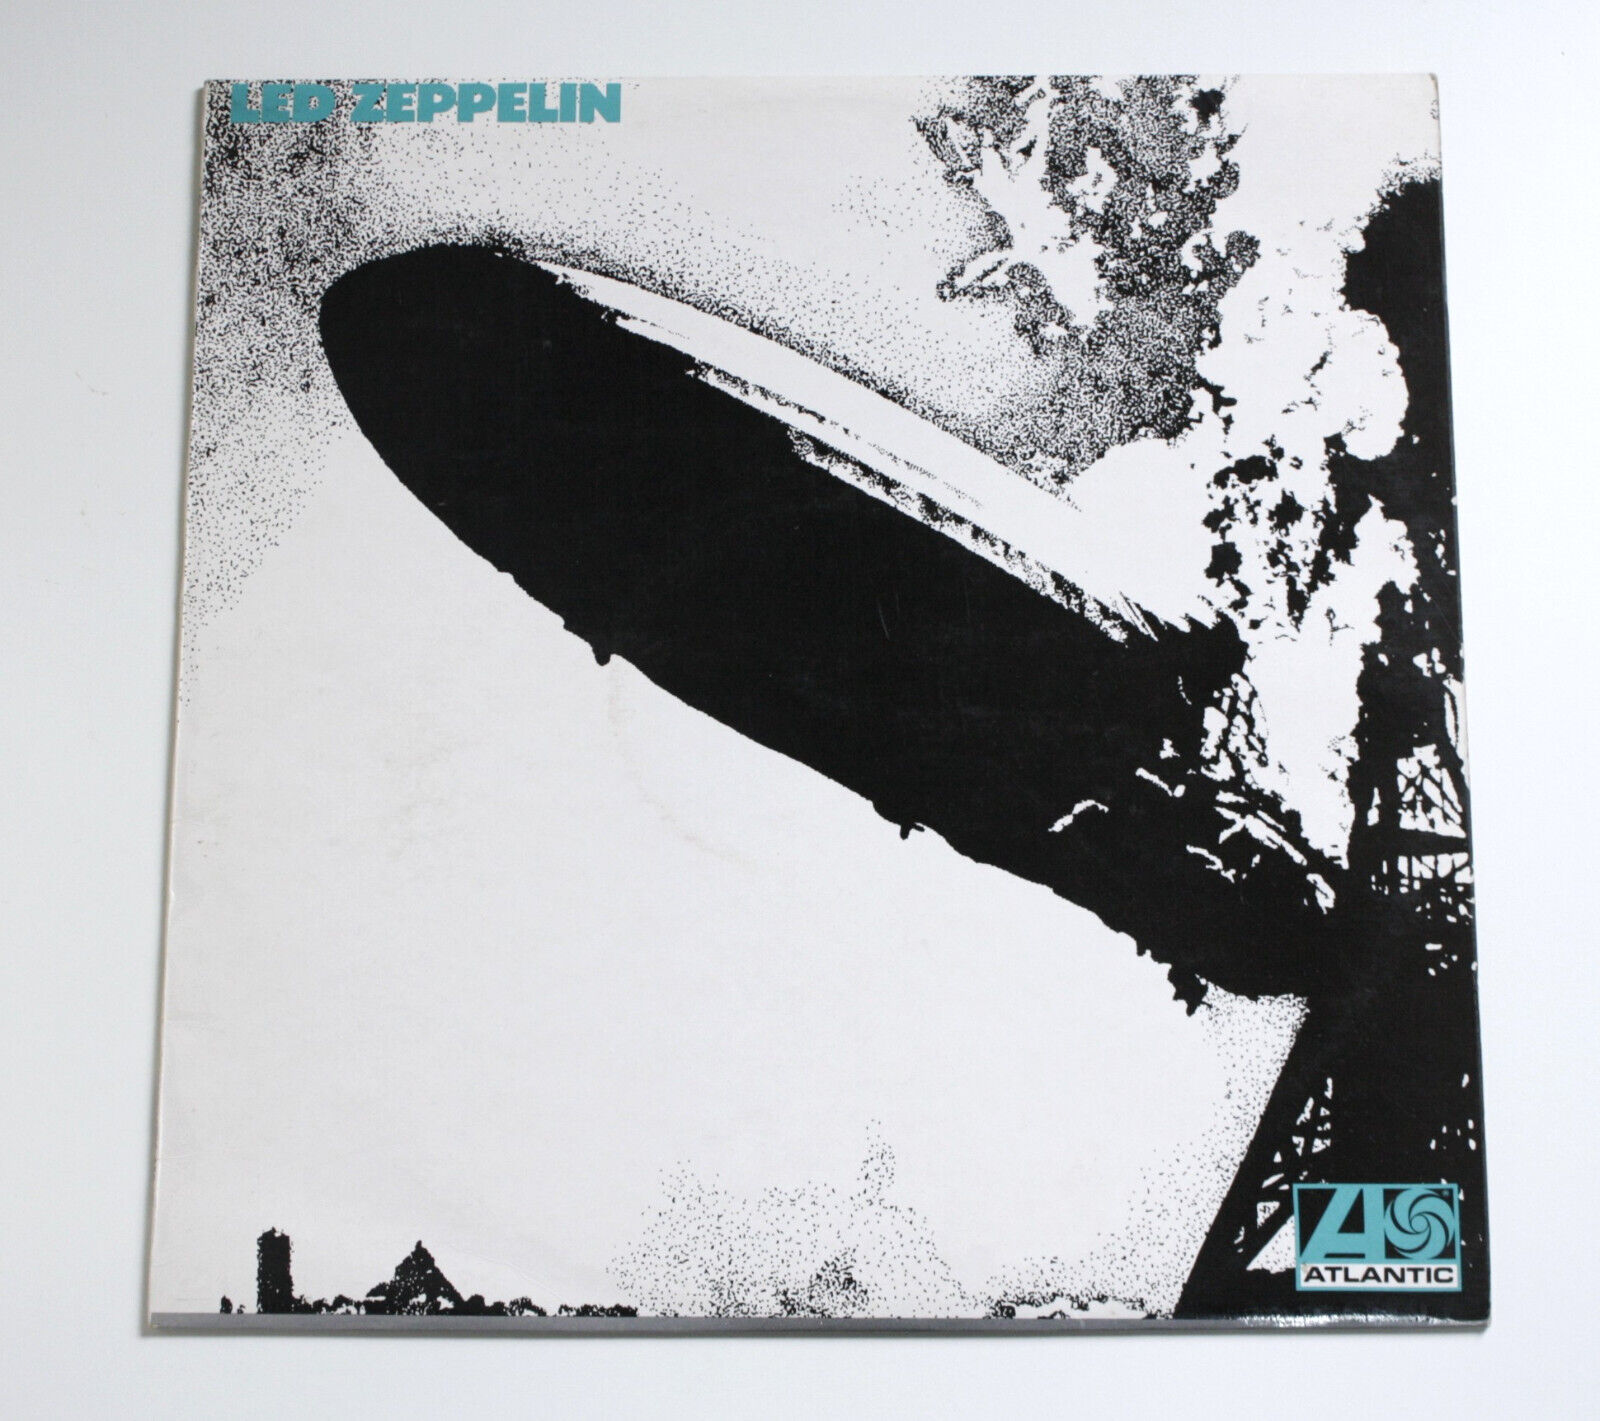 Led Zeppelin 1 Turquoise Lettering 1969 Rare First Pressing 588171 A 1 B 1 LP